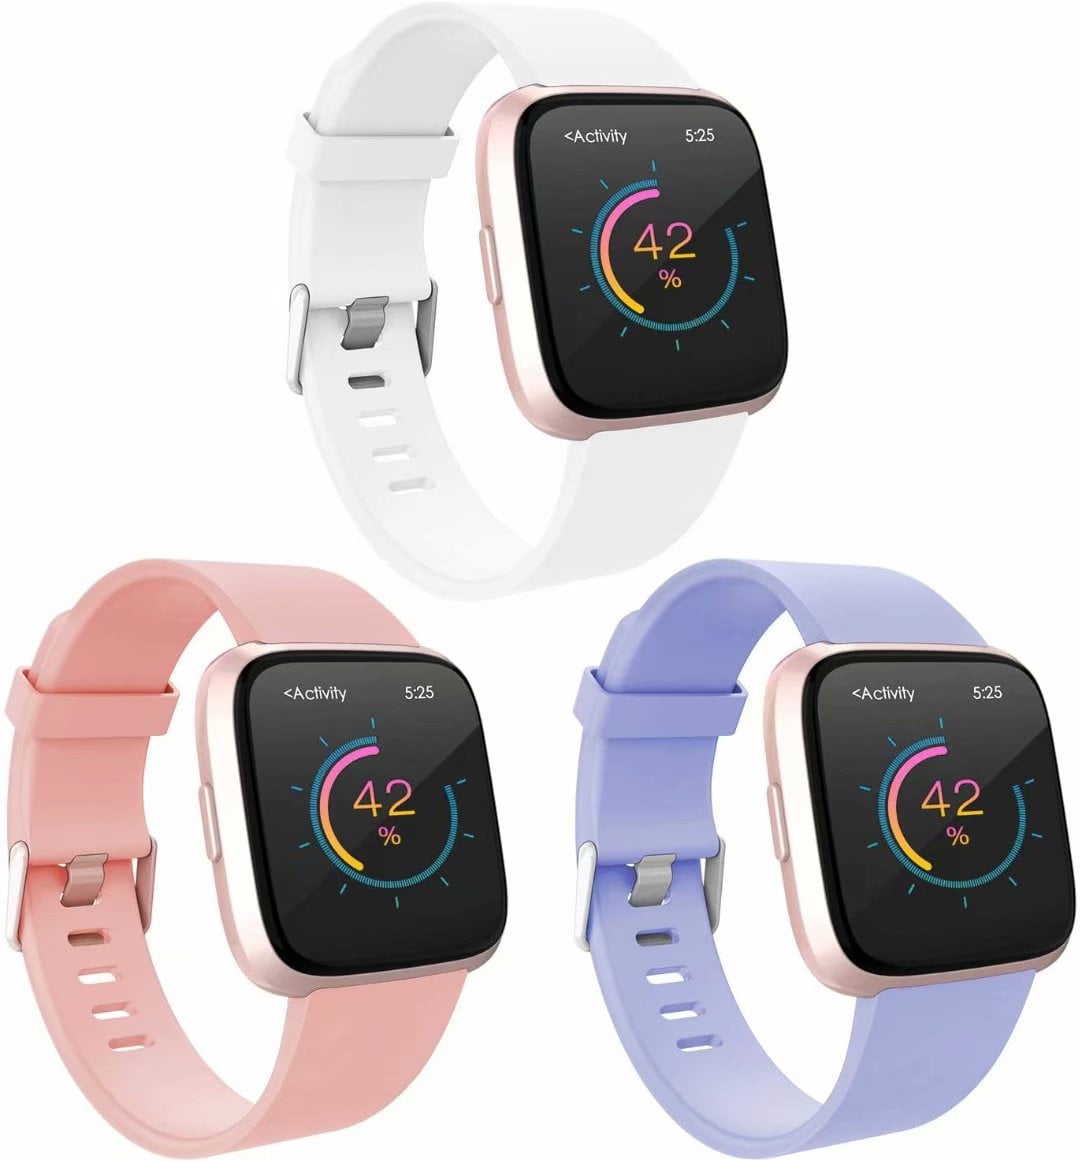 Details about   Replacement band for Fitbit Versa Strap Sport wristband  Buy 2 Get 1 FREE 